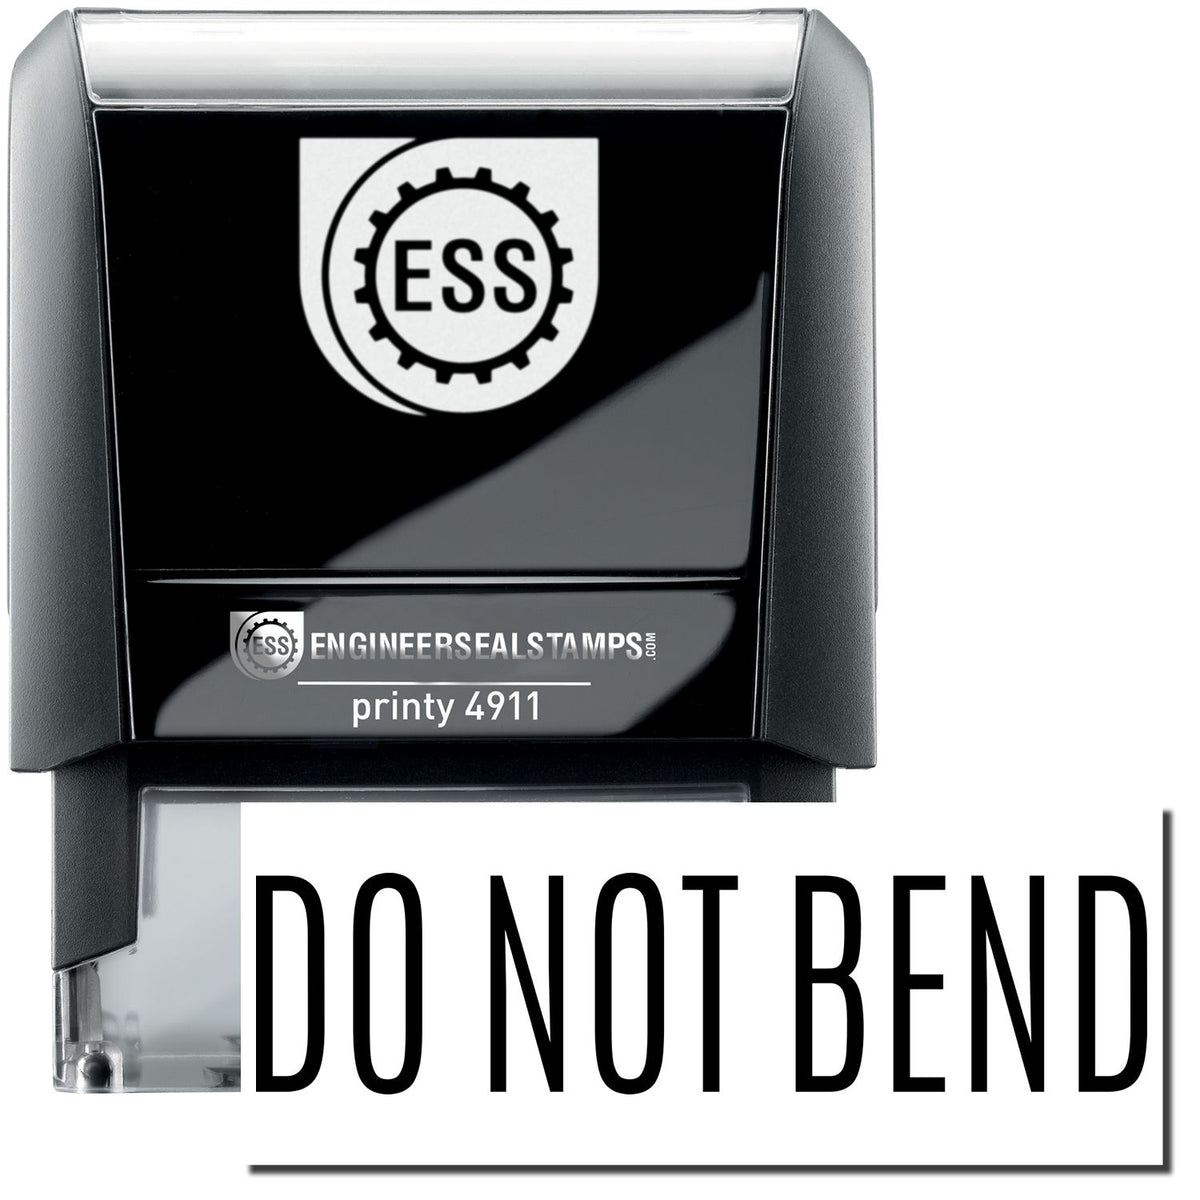 A self-inking stamp with a stamped image showing how the text &quot;DO NOT BEND&quot; is displayed after stamping.